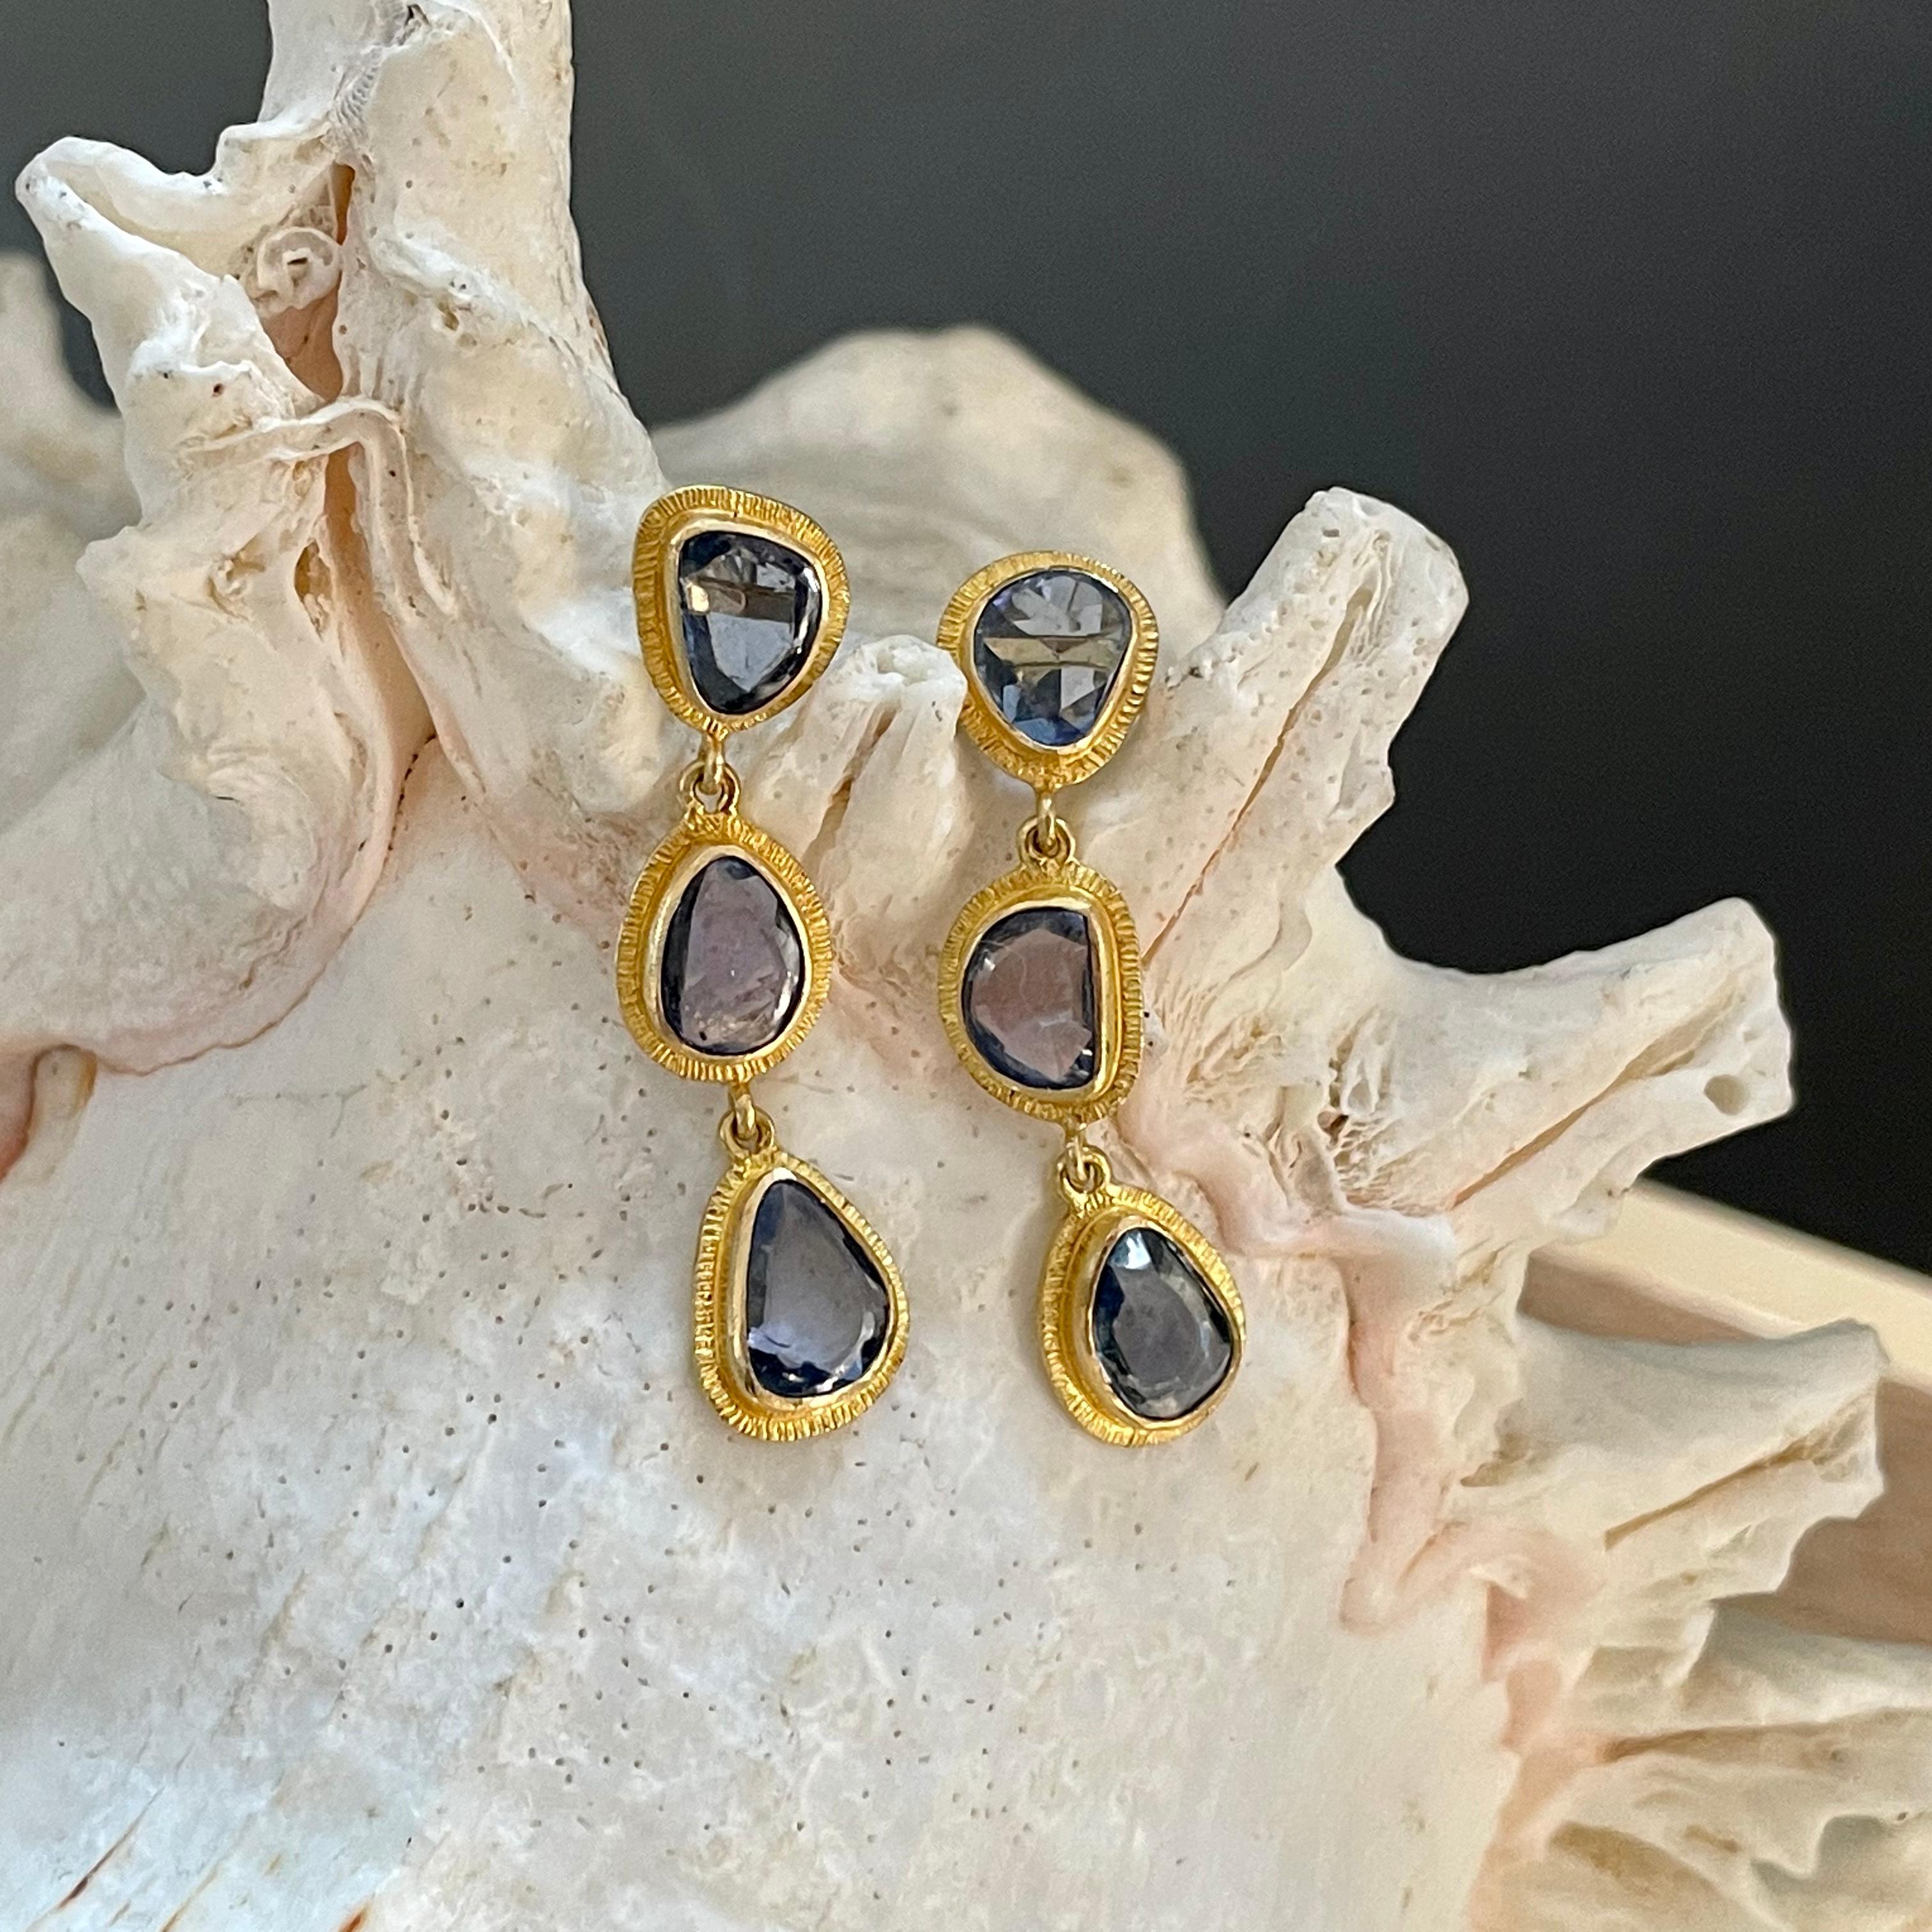 Six slightly irregular shaped buff-top lively blue sapphires between 5 x 6 to 6 x 8 mm set in organic line texture bezels cascade down in this Steven Battelle post earring creation.  Delightful. 
